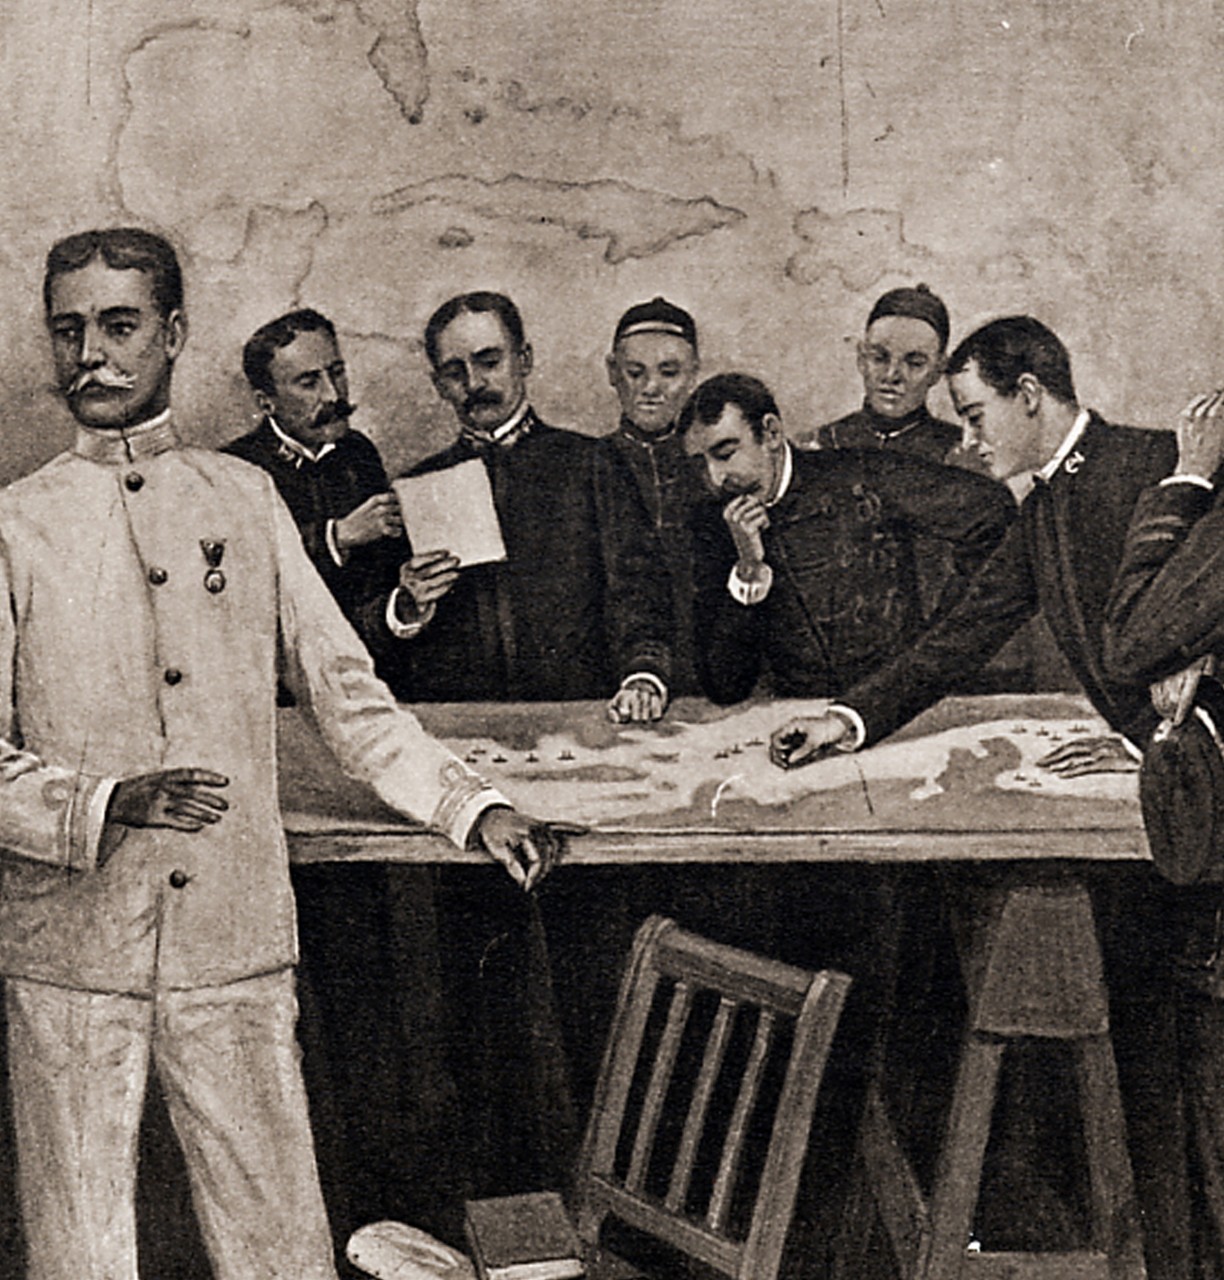 An illustration of officers who were war gaming at the Naval War College, which was an important part of the strategic planning for the Spanish-American War.